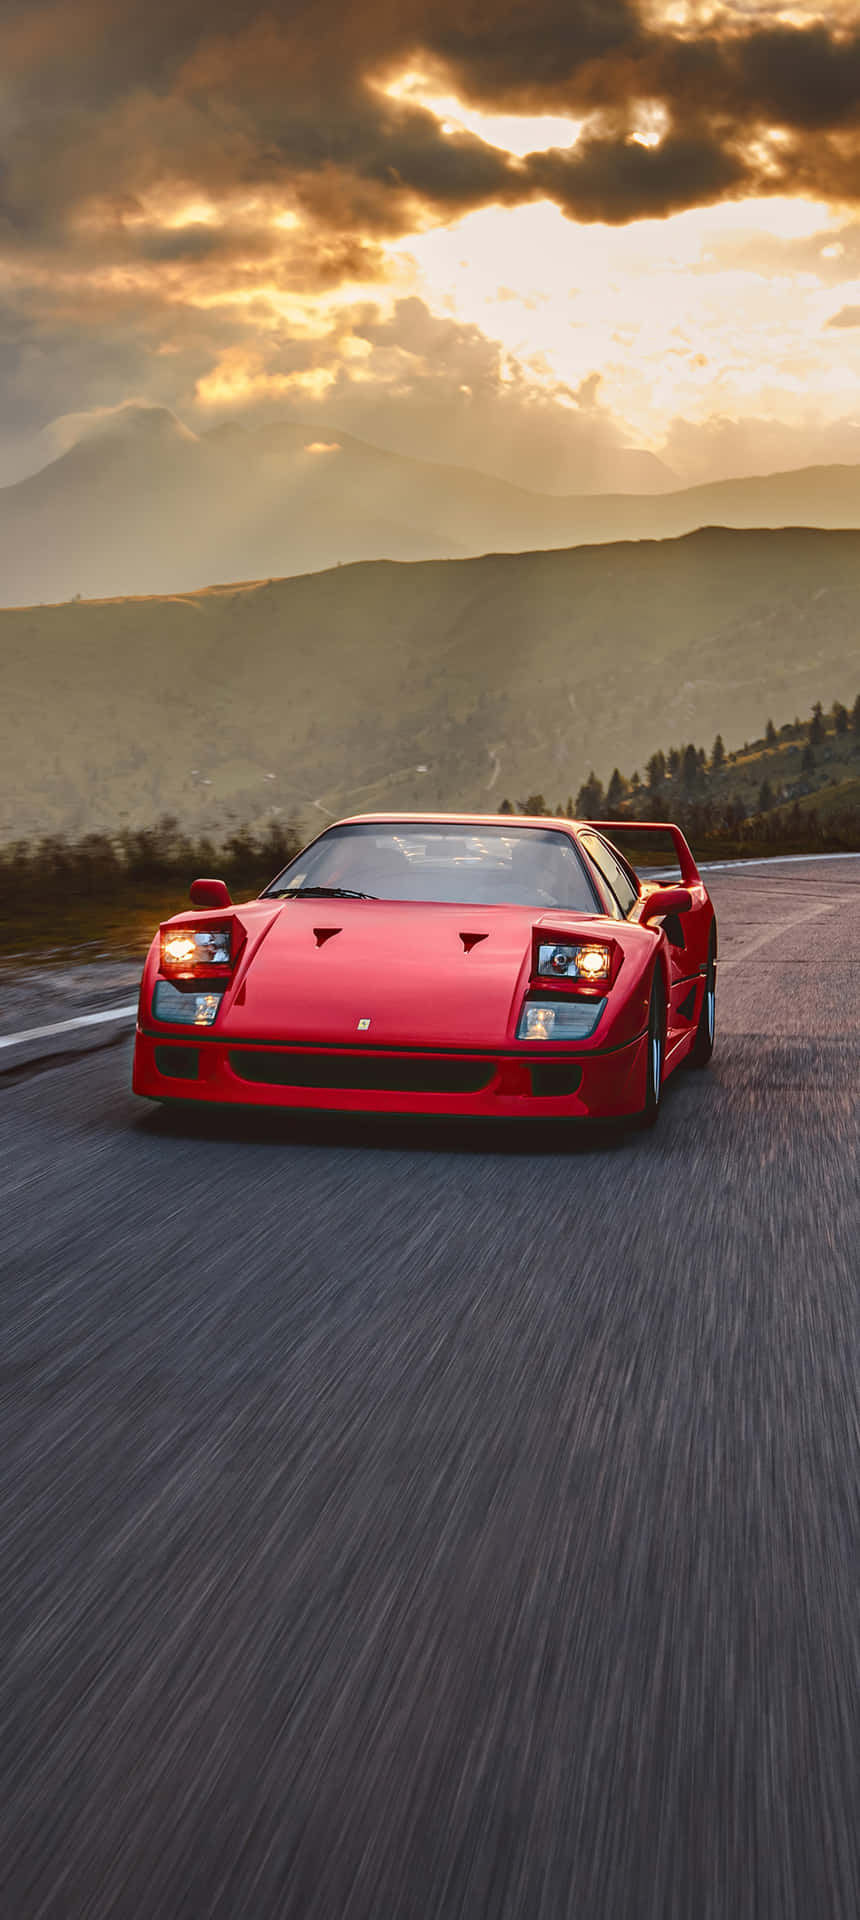 Cruise Around Town in Style with This Cool Ferrari Wallpaper